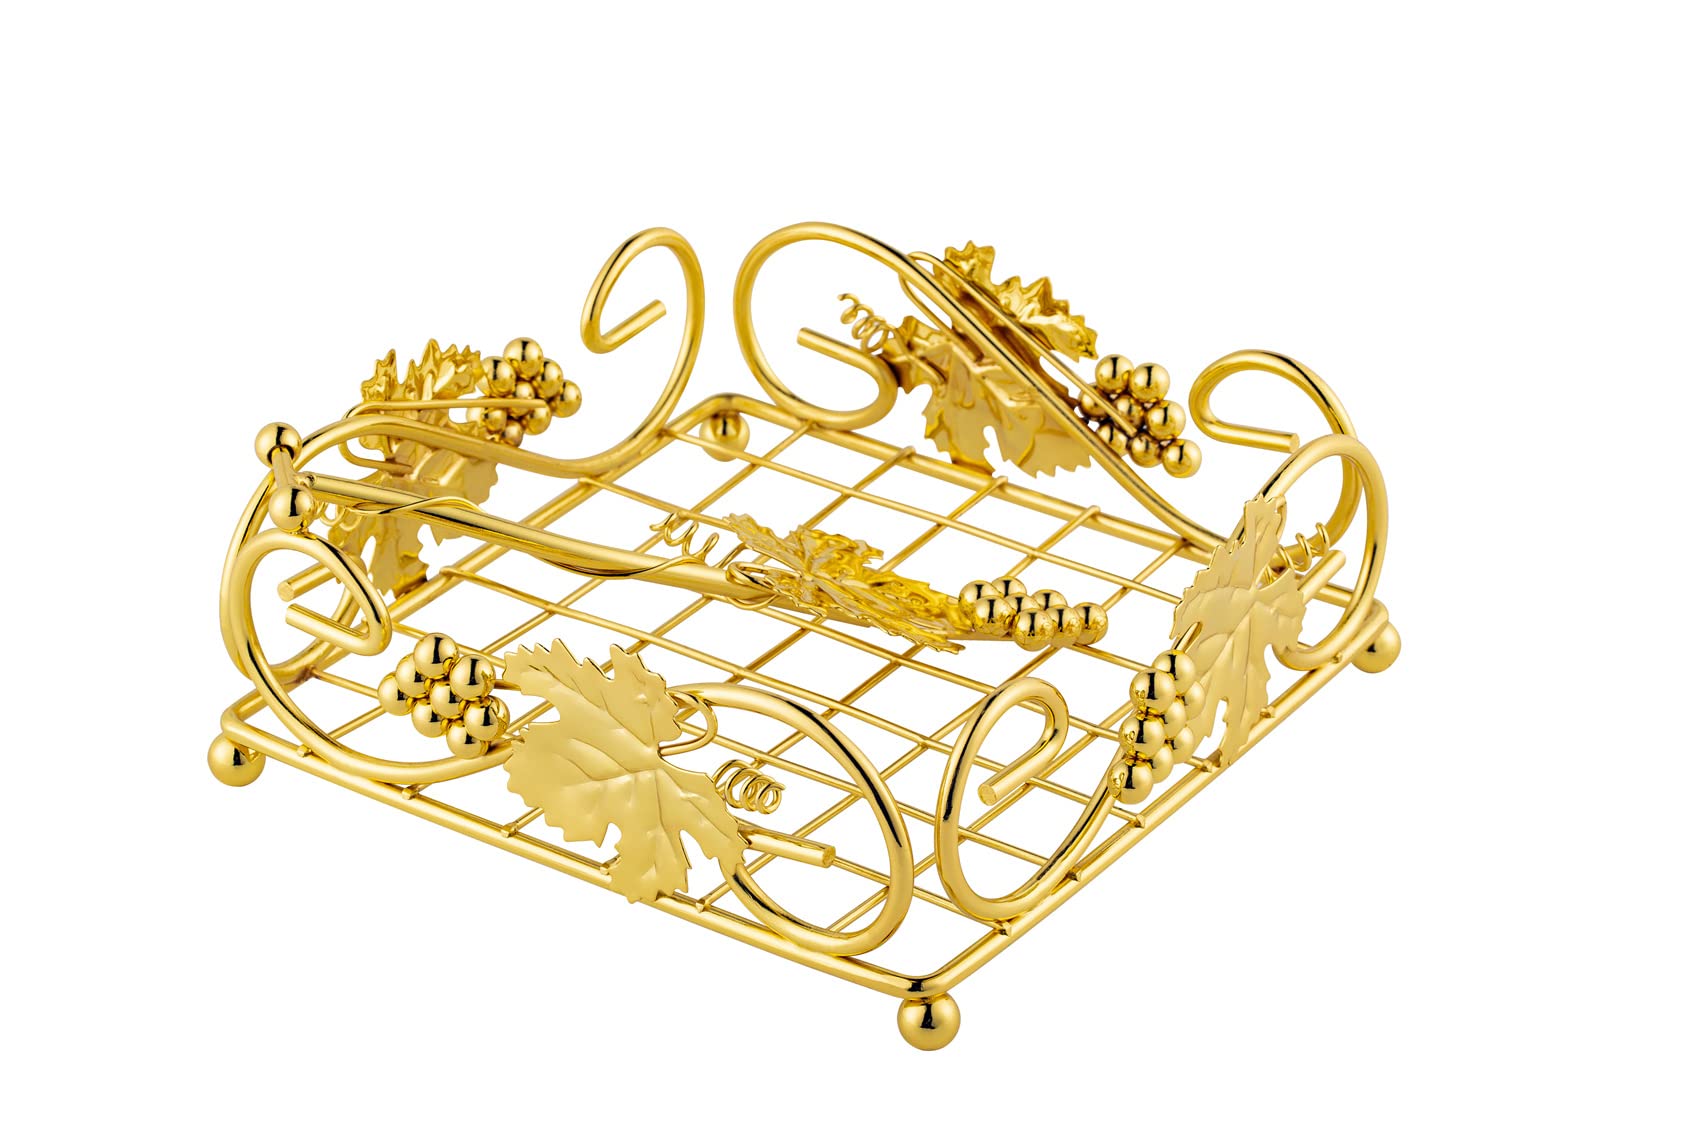 Flat Napkin Holder for Table Gold With Weight Arm for Kitchen Courtertops Dinning Table Grape Leaf Modern Tissue Dispenser Stainless Steel Gilding (7" L X 7" W X 2.5" H)